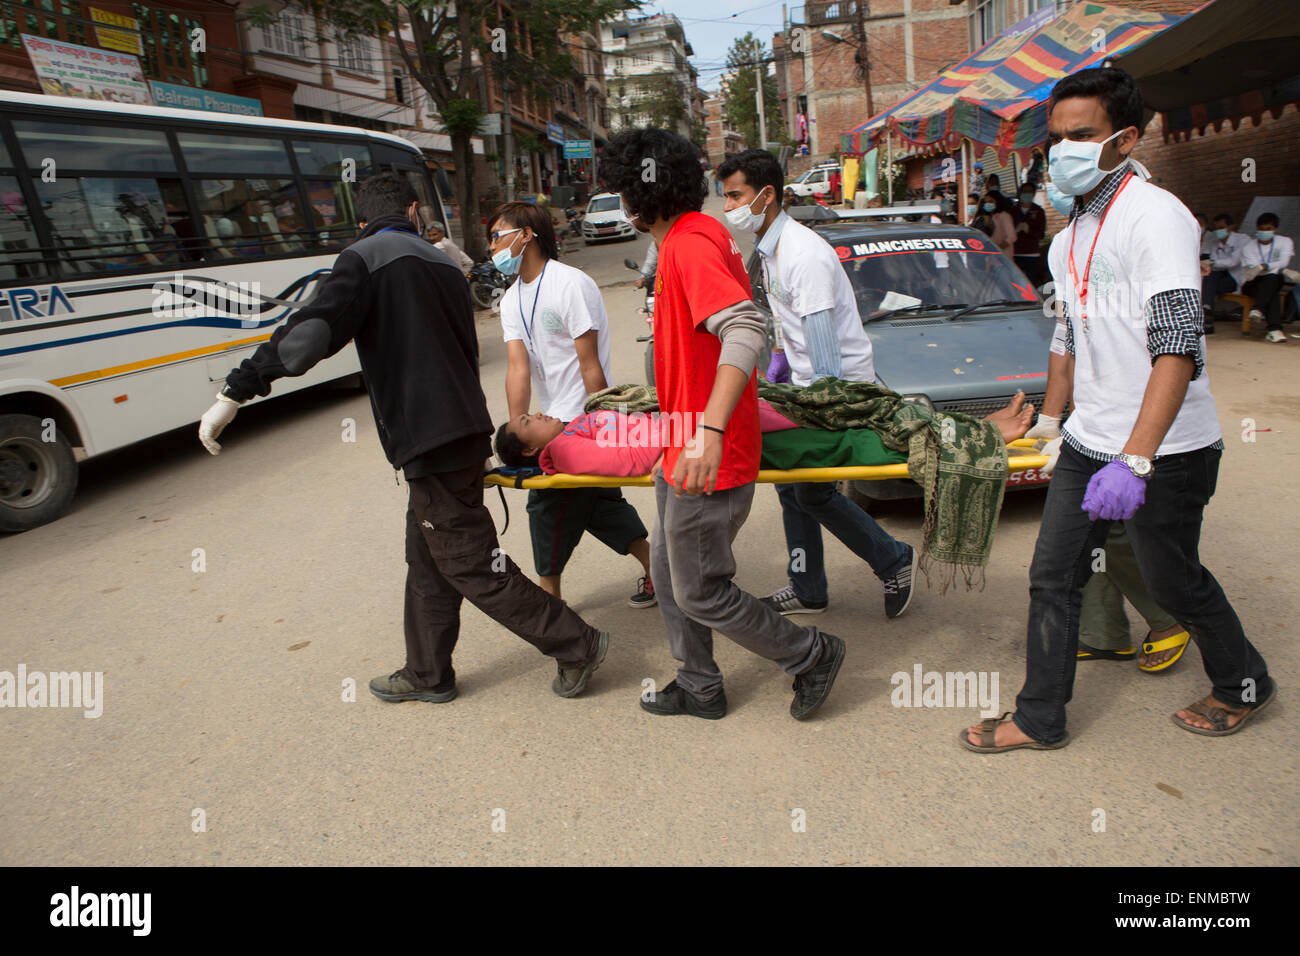 An injured woman is carried on a stretcher outside Kathmandu University Hospital in Karvre District, Nepal. Stock Photo